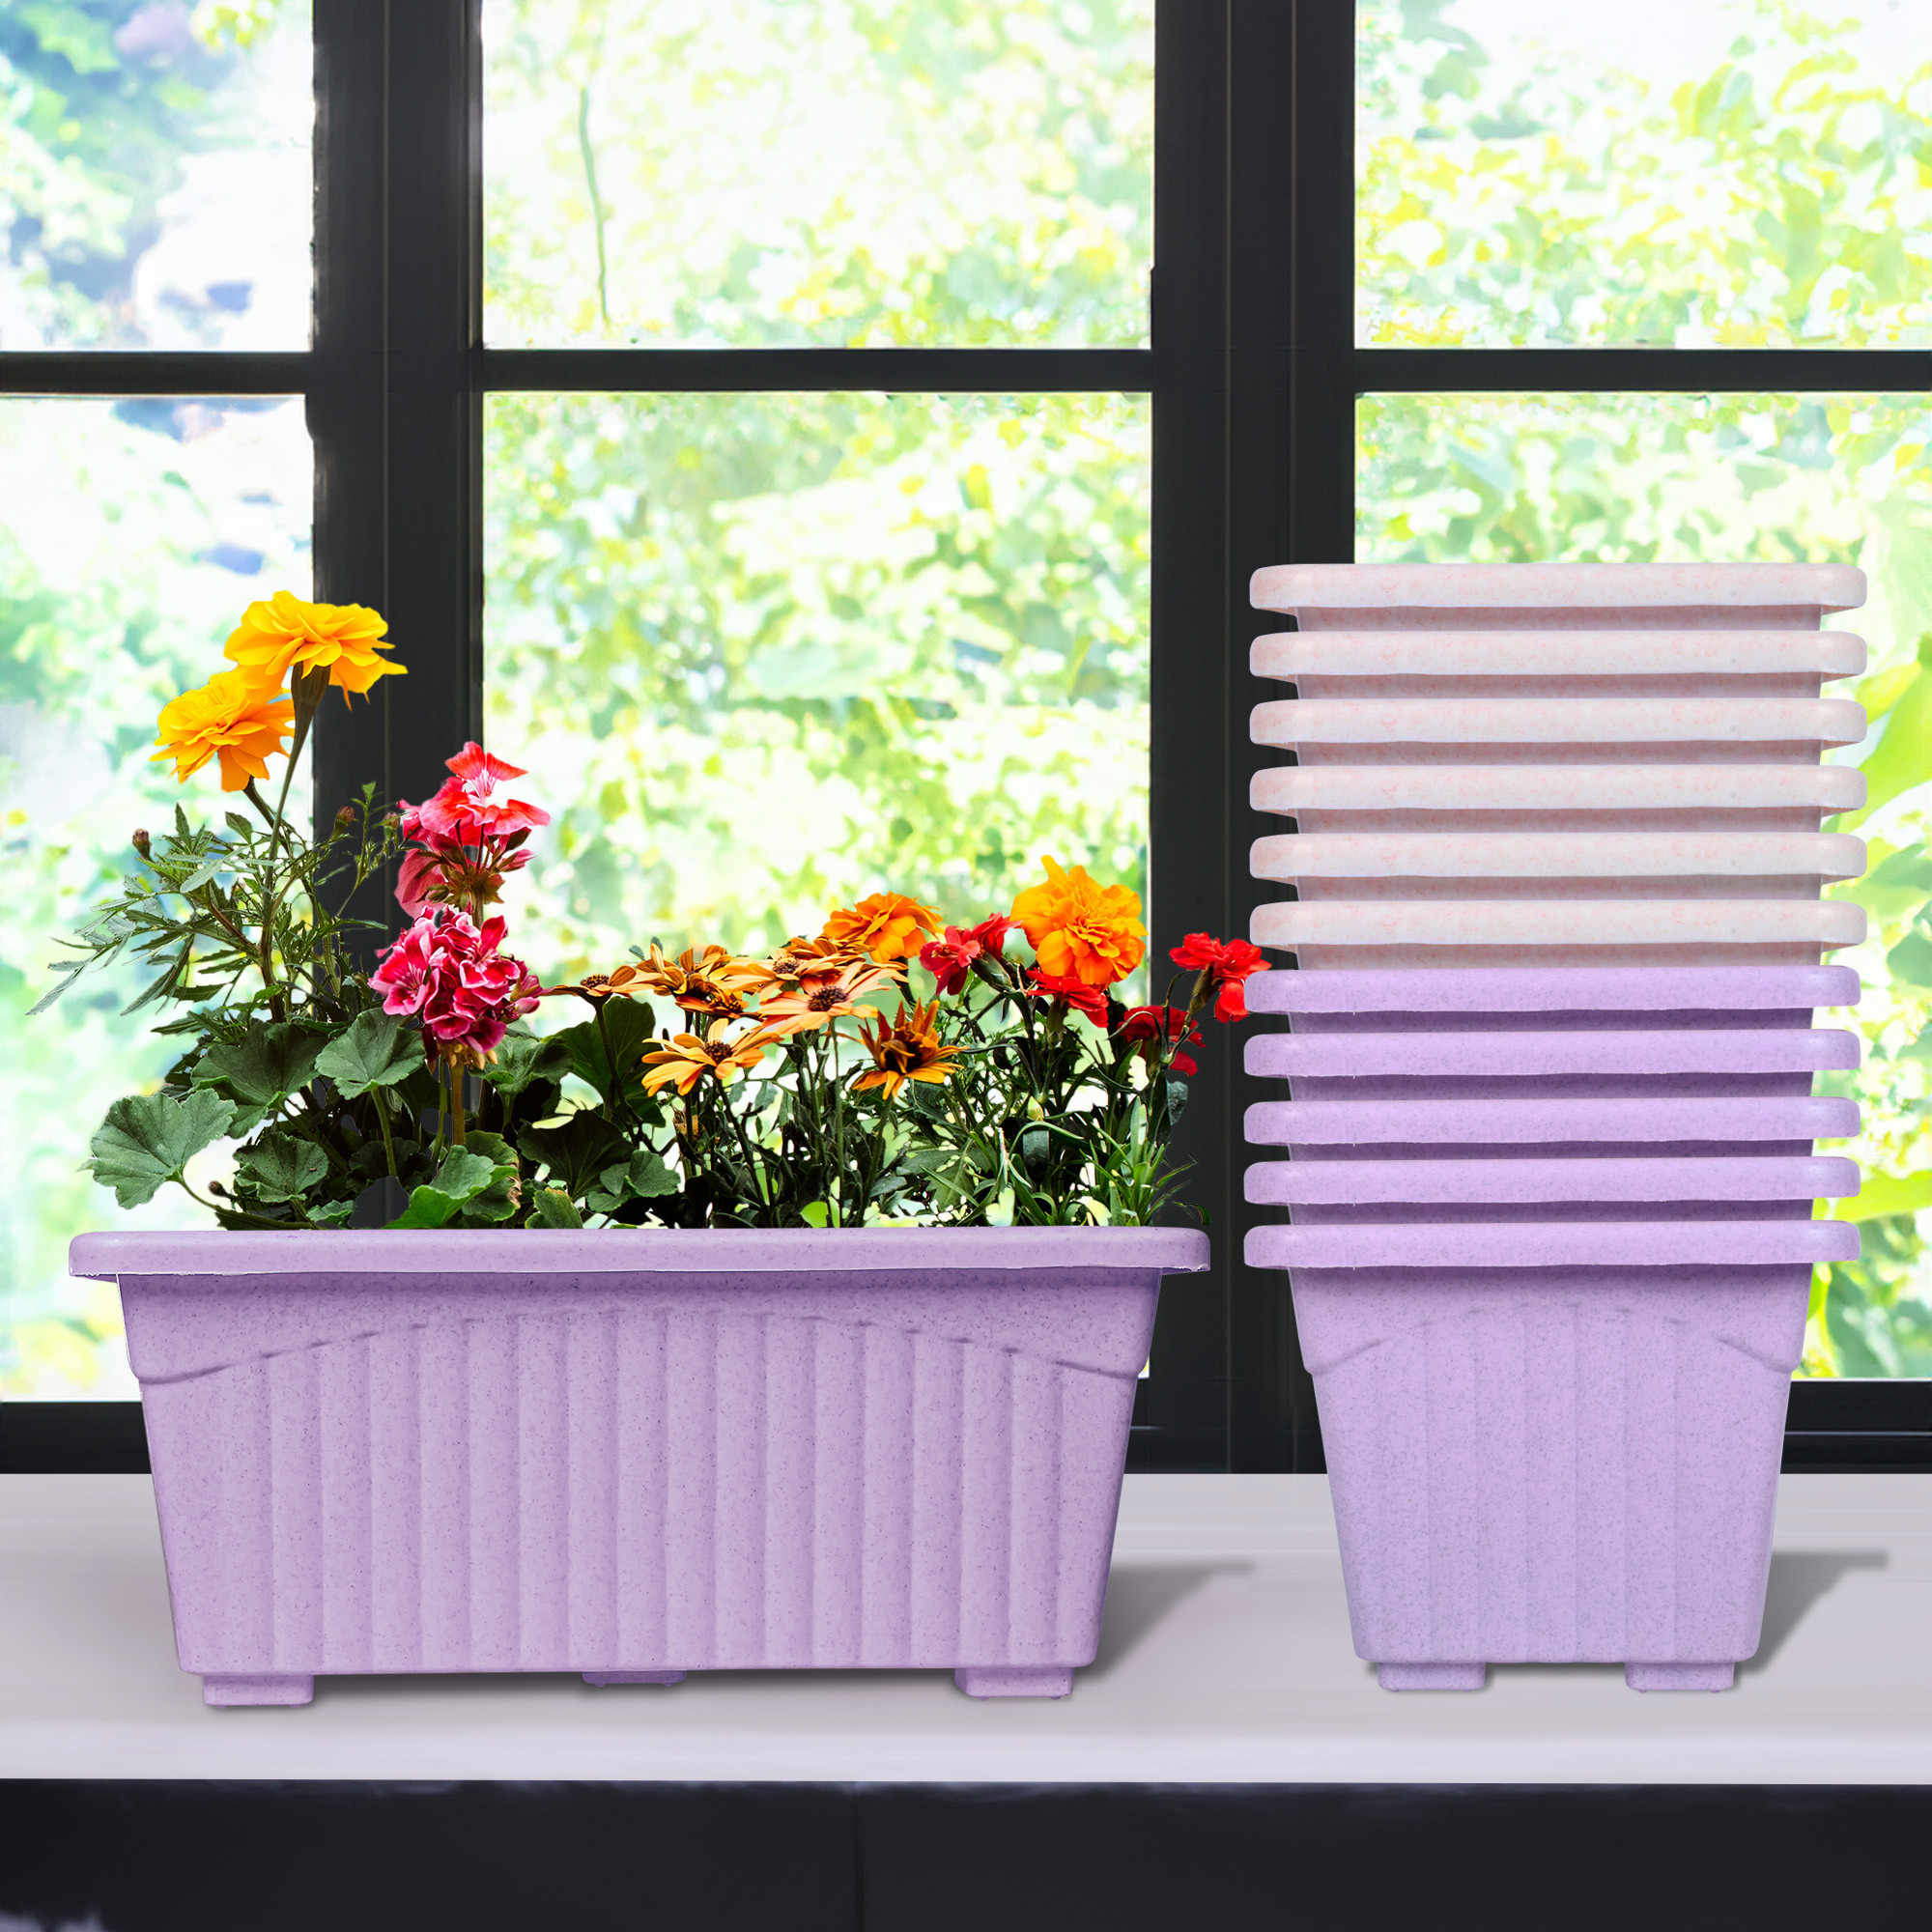 Kuber Industries Flower Pot | Flower Pot for Living Room-Office | Planters for Home-Lawns & Gardening | Window Flower Pots for Balcony | Marble Jupitar | Purple & Pink